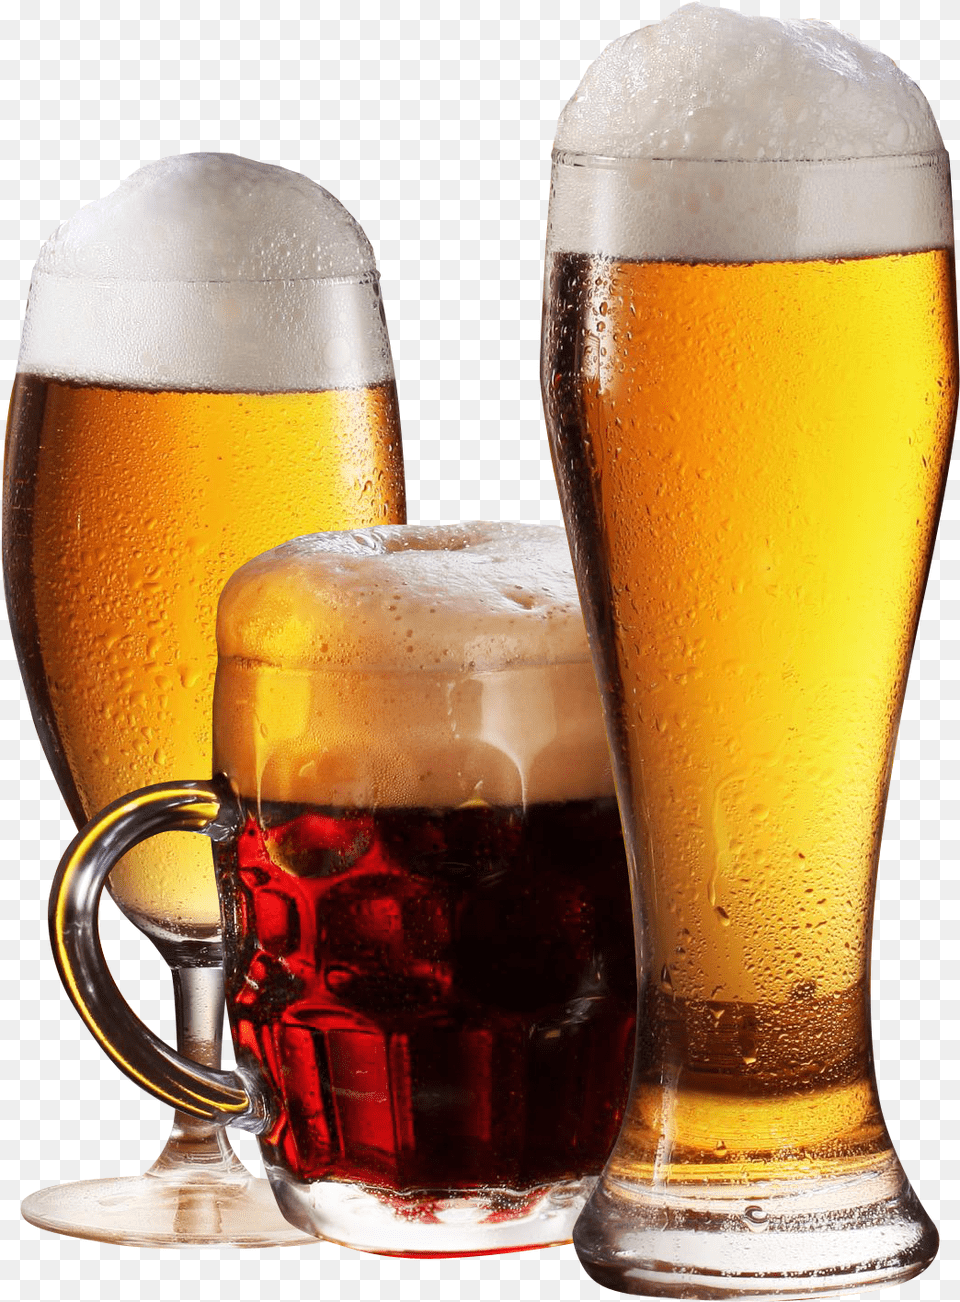 Beer Glass Image Glass Of Beer, Alcohol, Beer Glass, Beverage, Lager Png